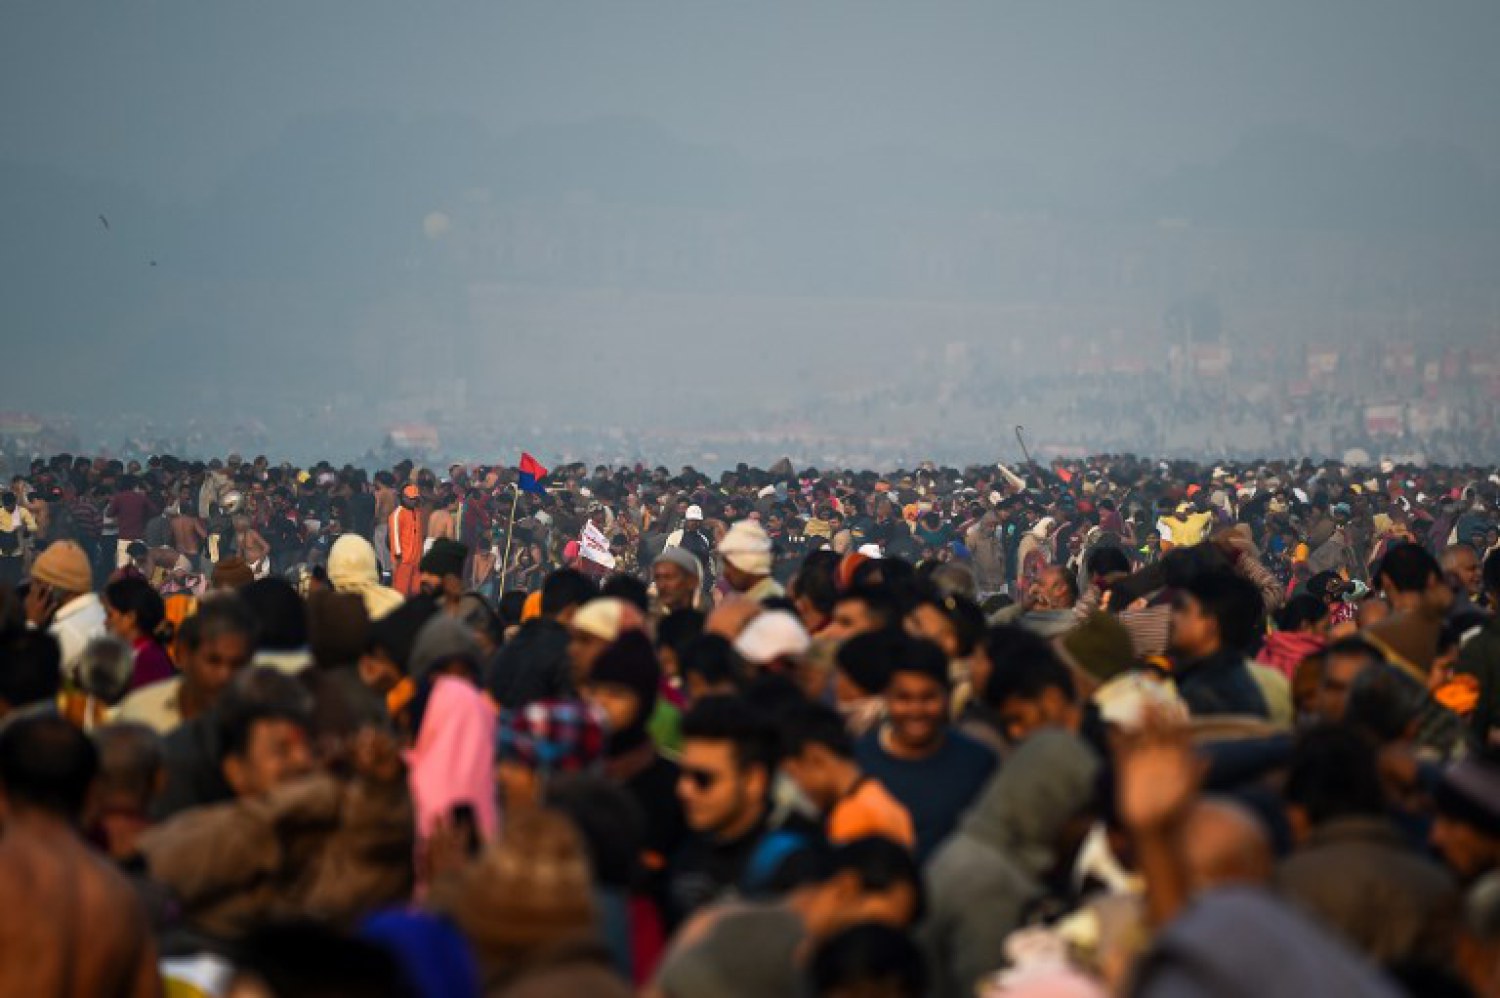 Millions in India gather for world's largest religious event